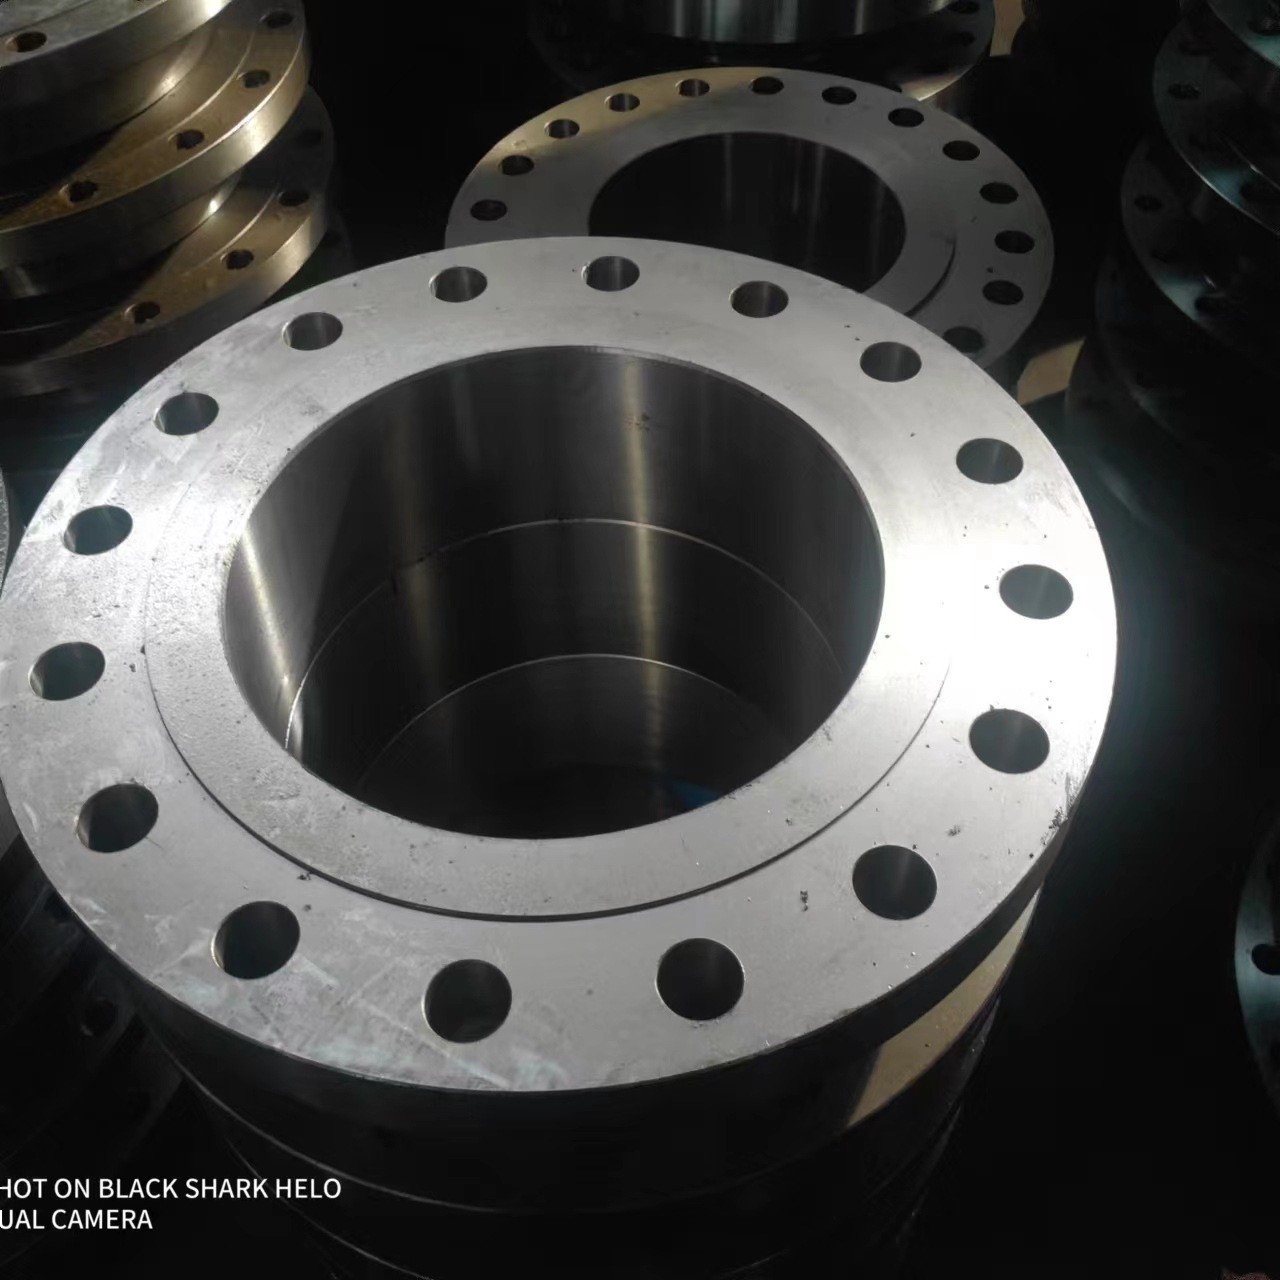 Stainless Fittings WN Flange SCH80 A182 Grade F316L Forged Steel Flanges